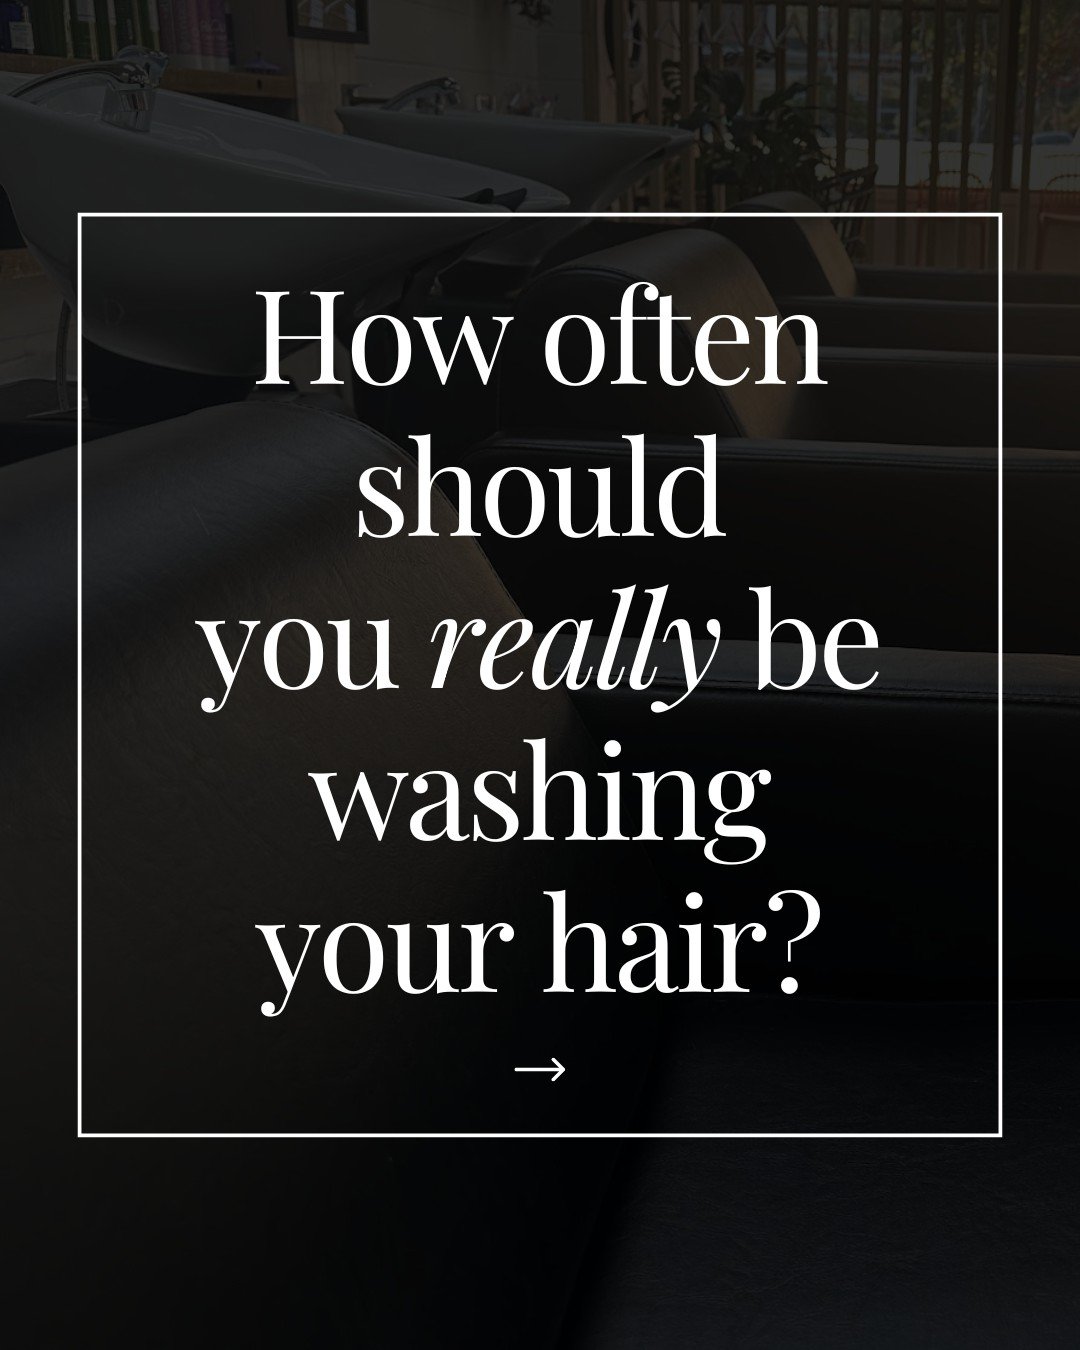 To Wash or Not to Wash? That is the Question!

Chances are, you've been told numerous times to avoid washing your too often, but let's explore a little more, shall we?

We recommend that on average, hair should be washed 2-3 times a week. A clean sca